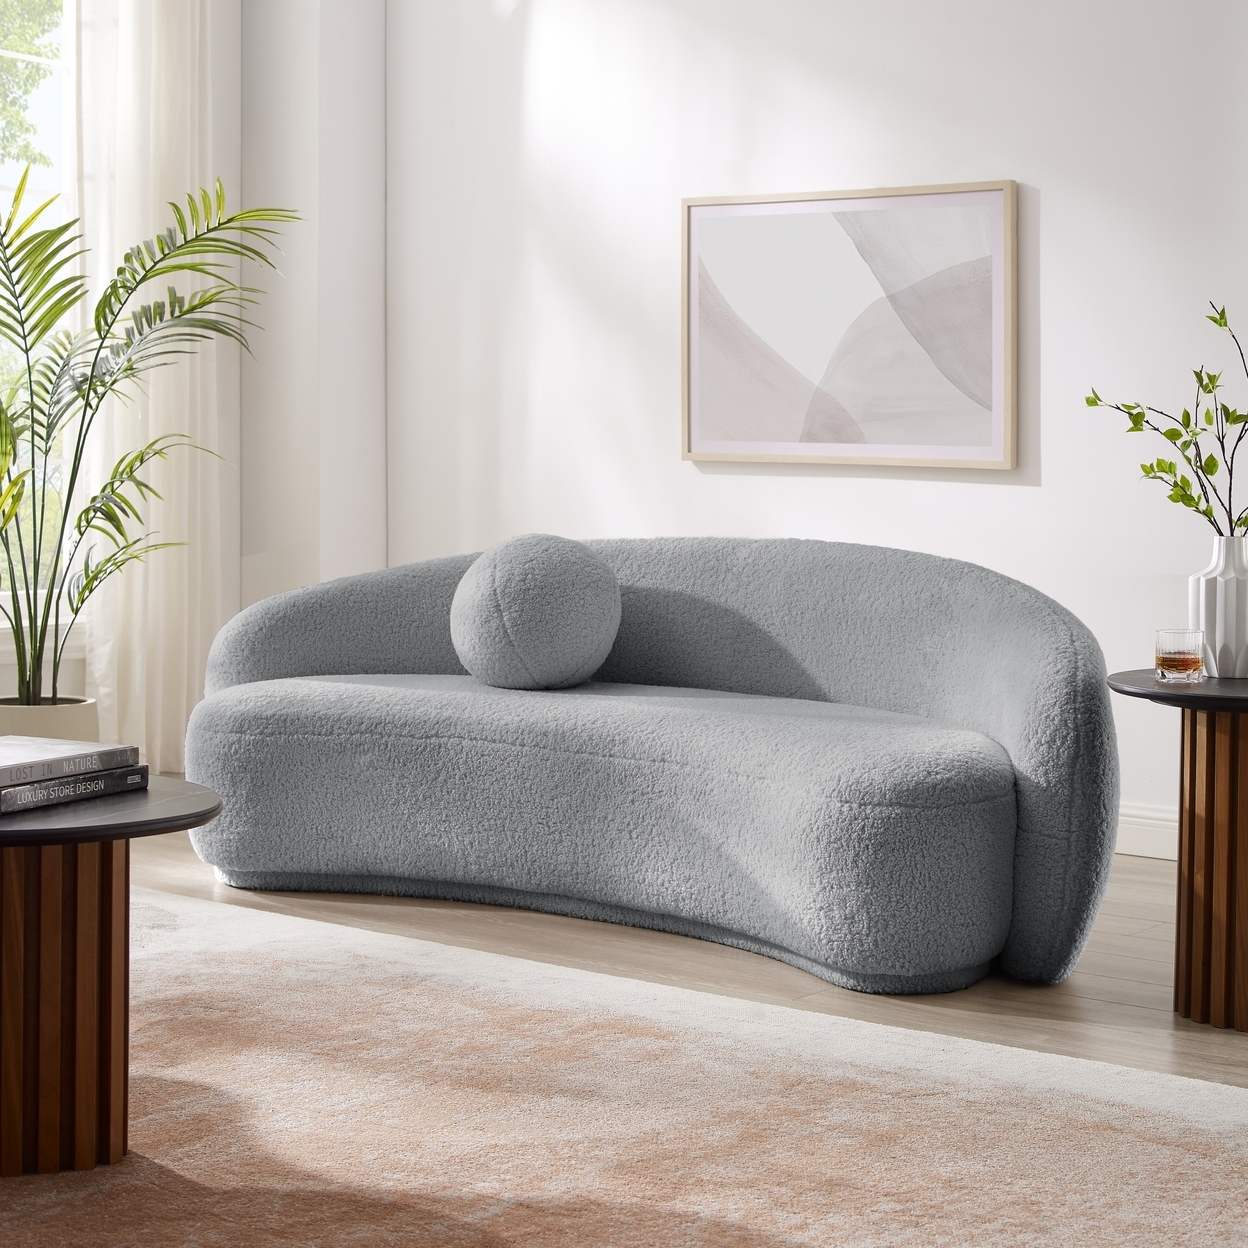 Coralyn Sofa - Upholstered, Rounded Design With Sloped Sweeping Arms,cloud-like Look, Accent Pillow Ball - Grey